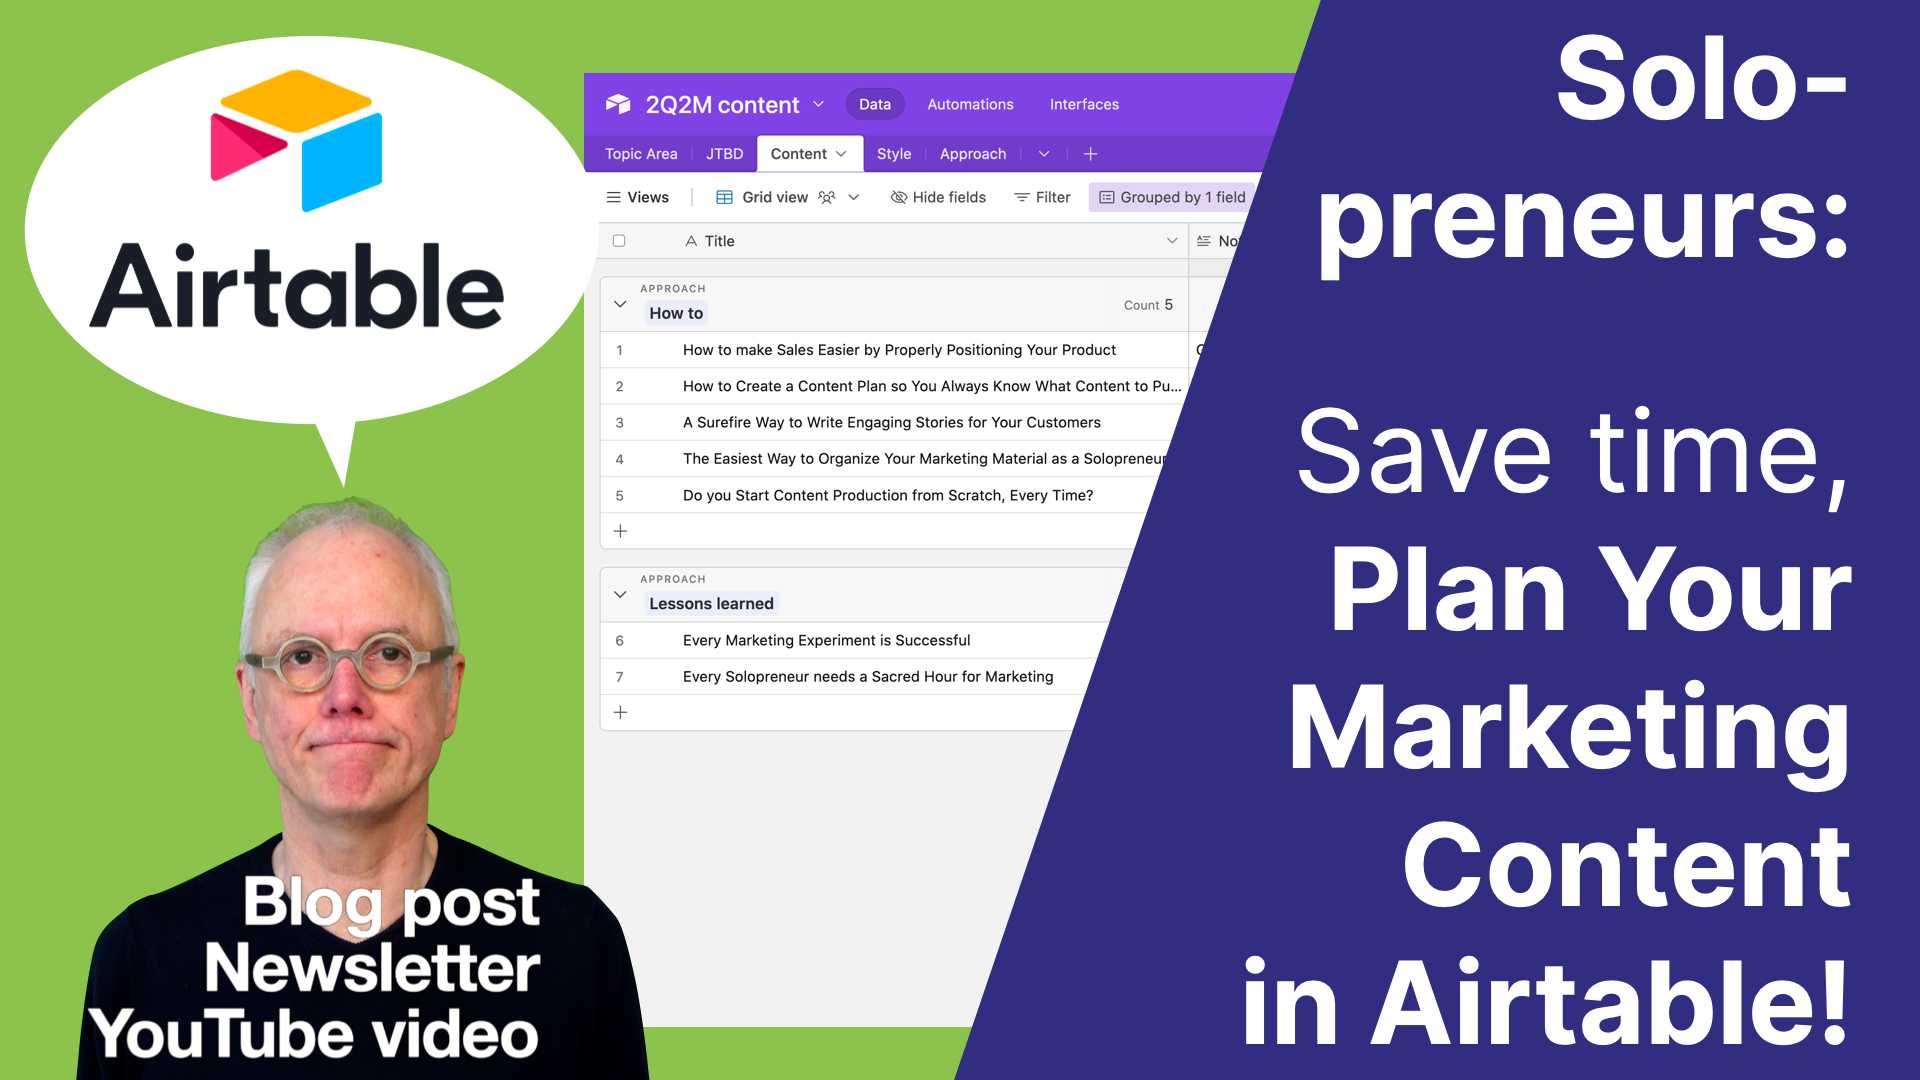 How to Create a Content Plan in Airtable, so You Always Know What